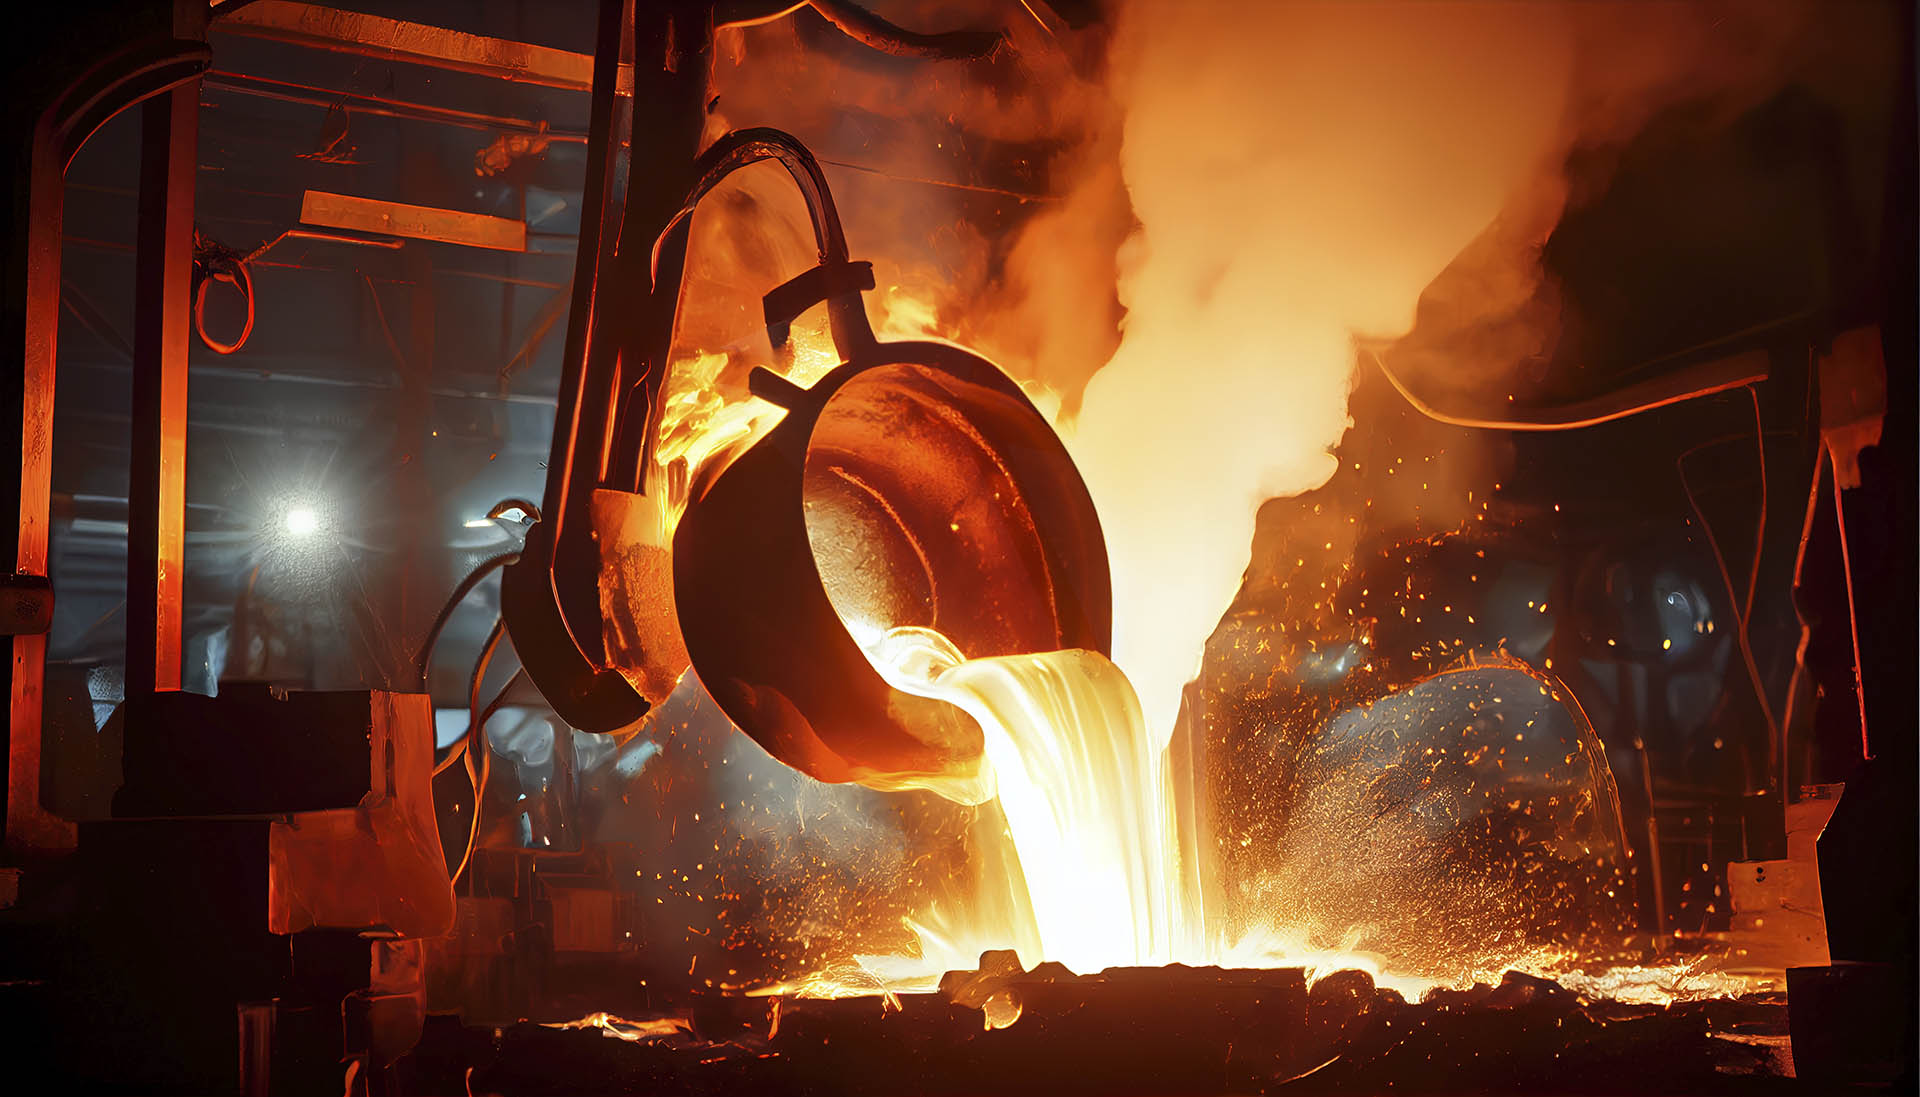 Liquid steel is poured from a metallurgical ladle.